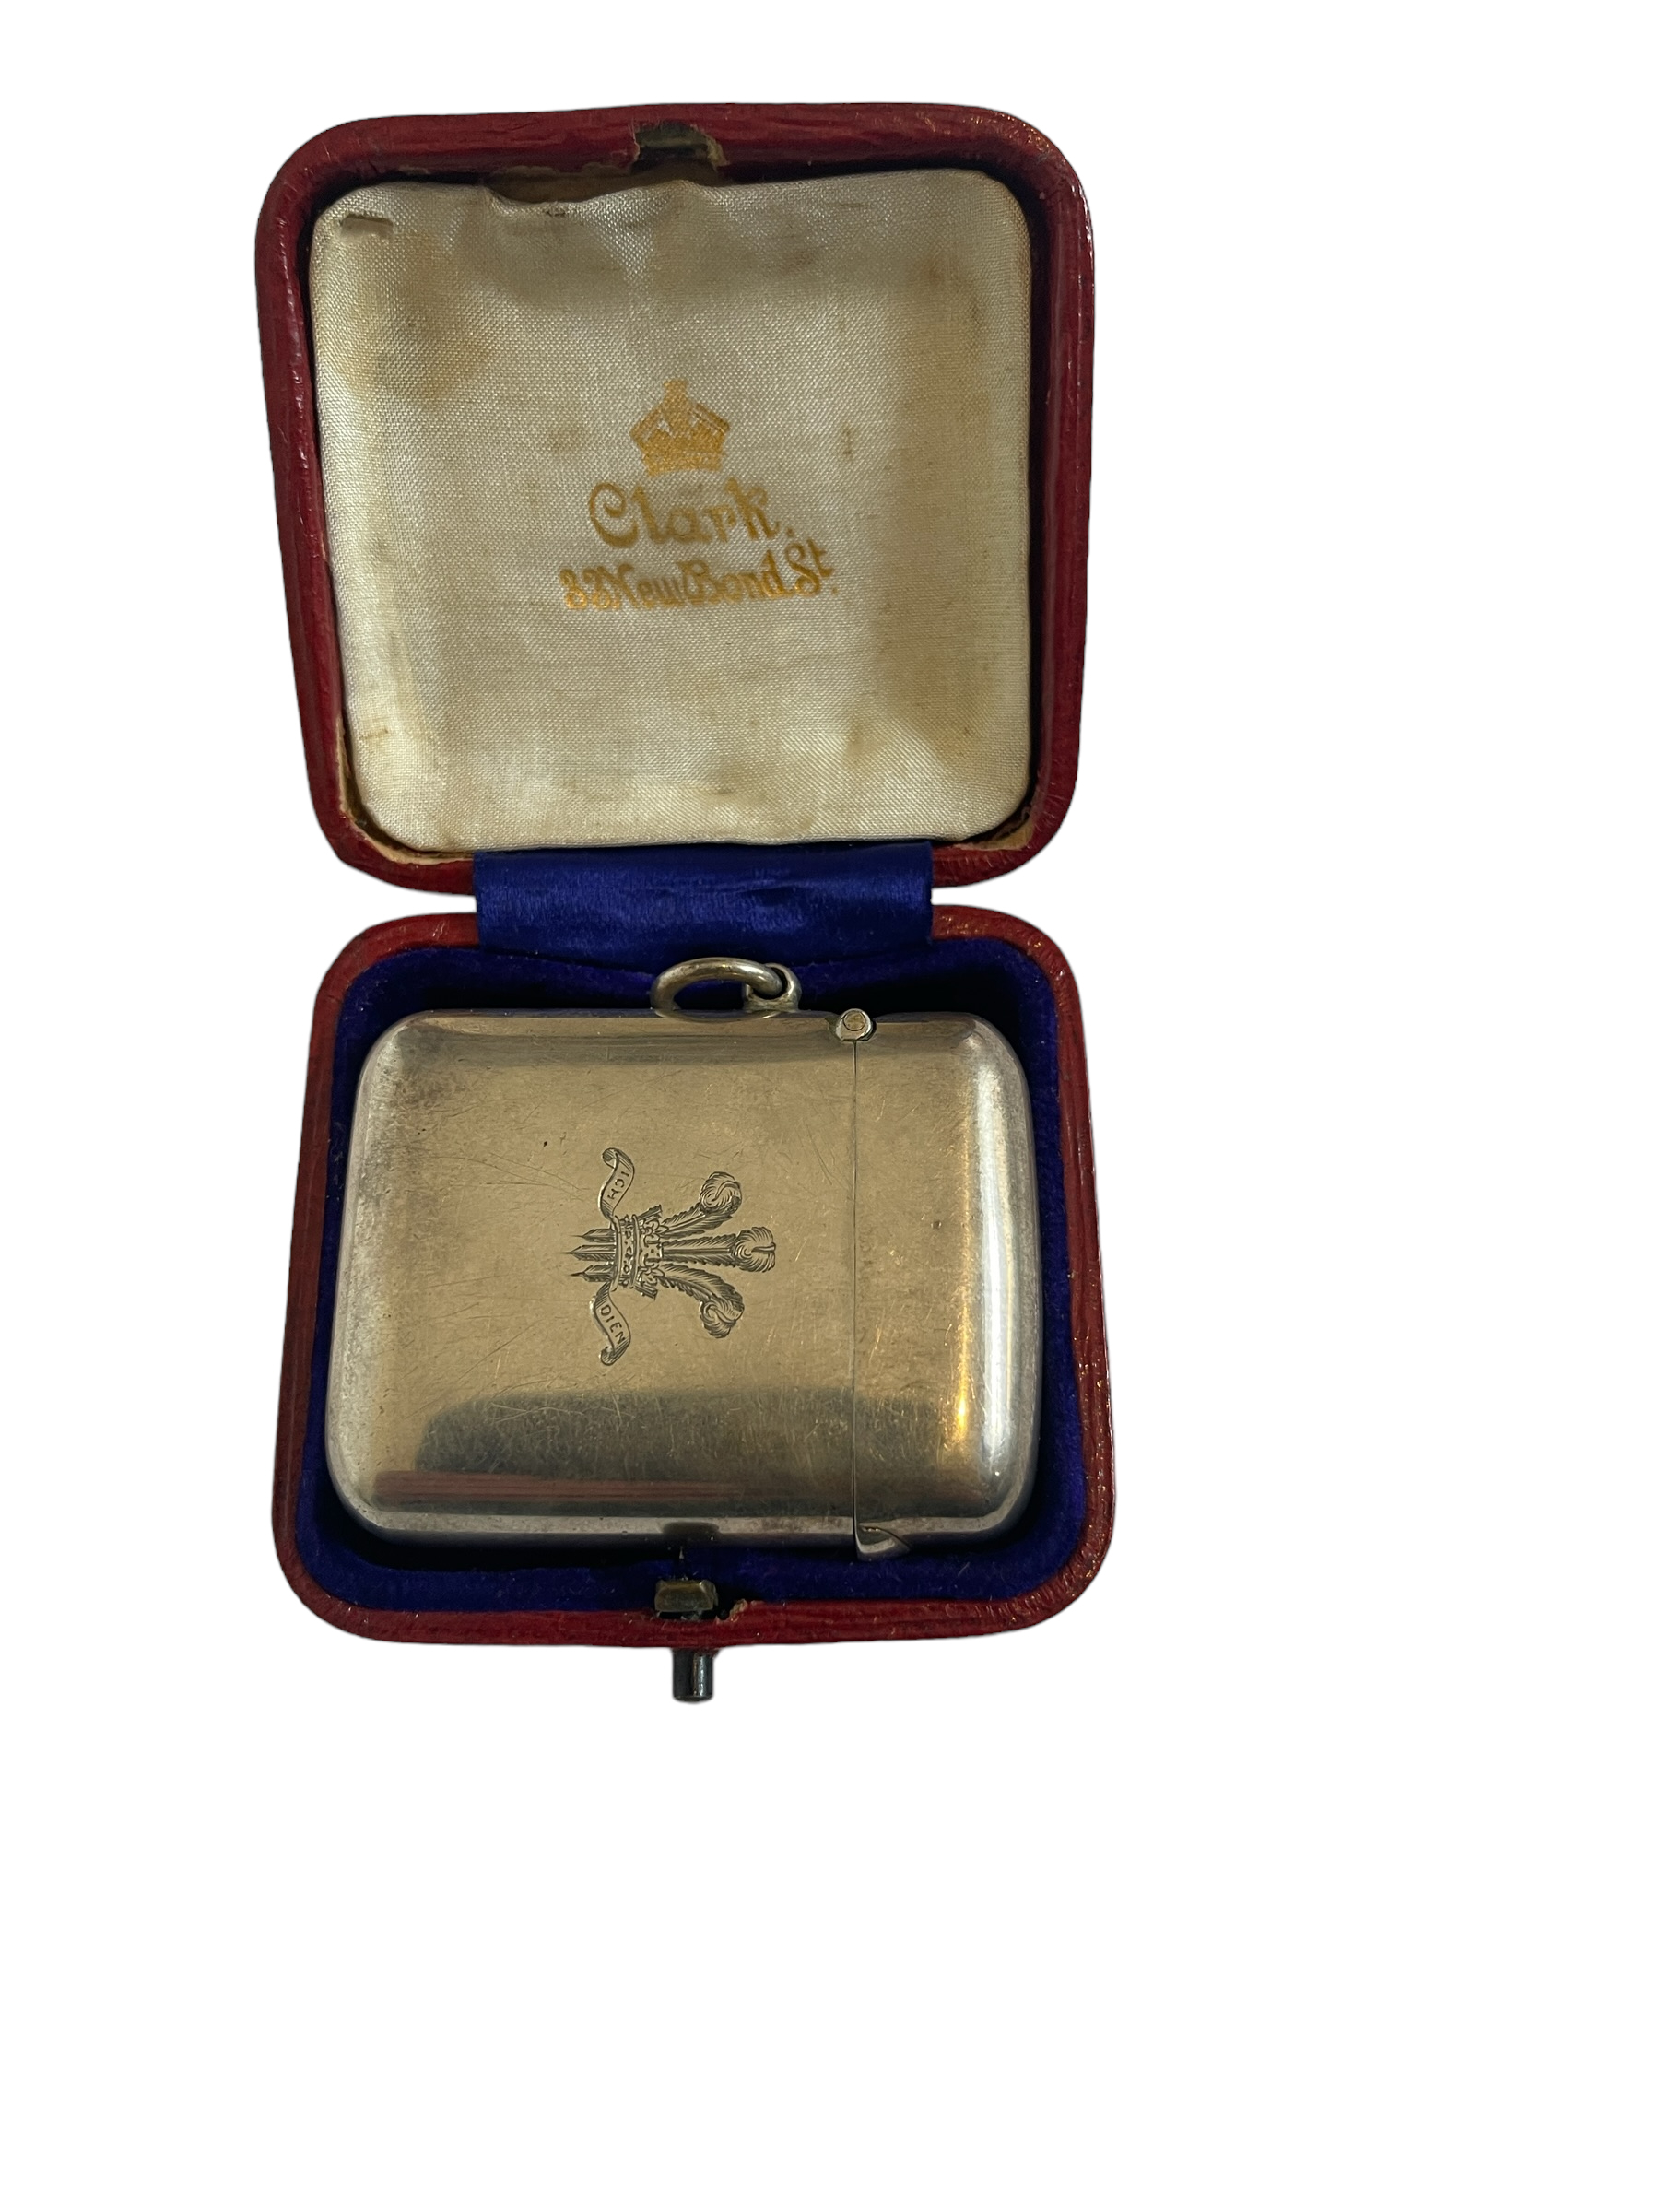 Alfred Clark New Bond St London Prince of Wales Feathers Cypher Boxed Vesta Case.